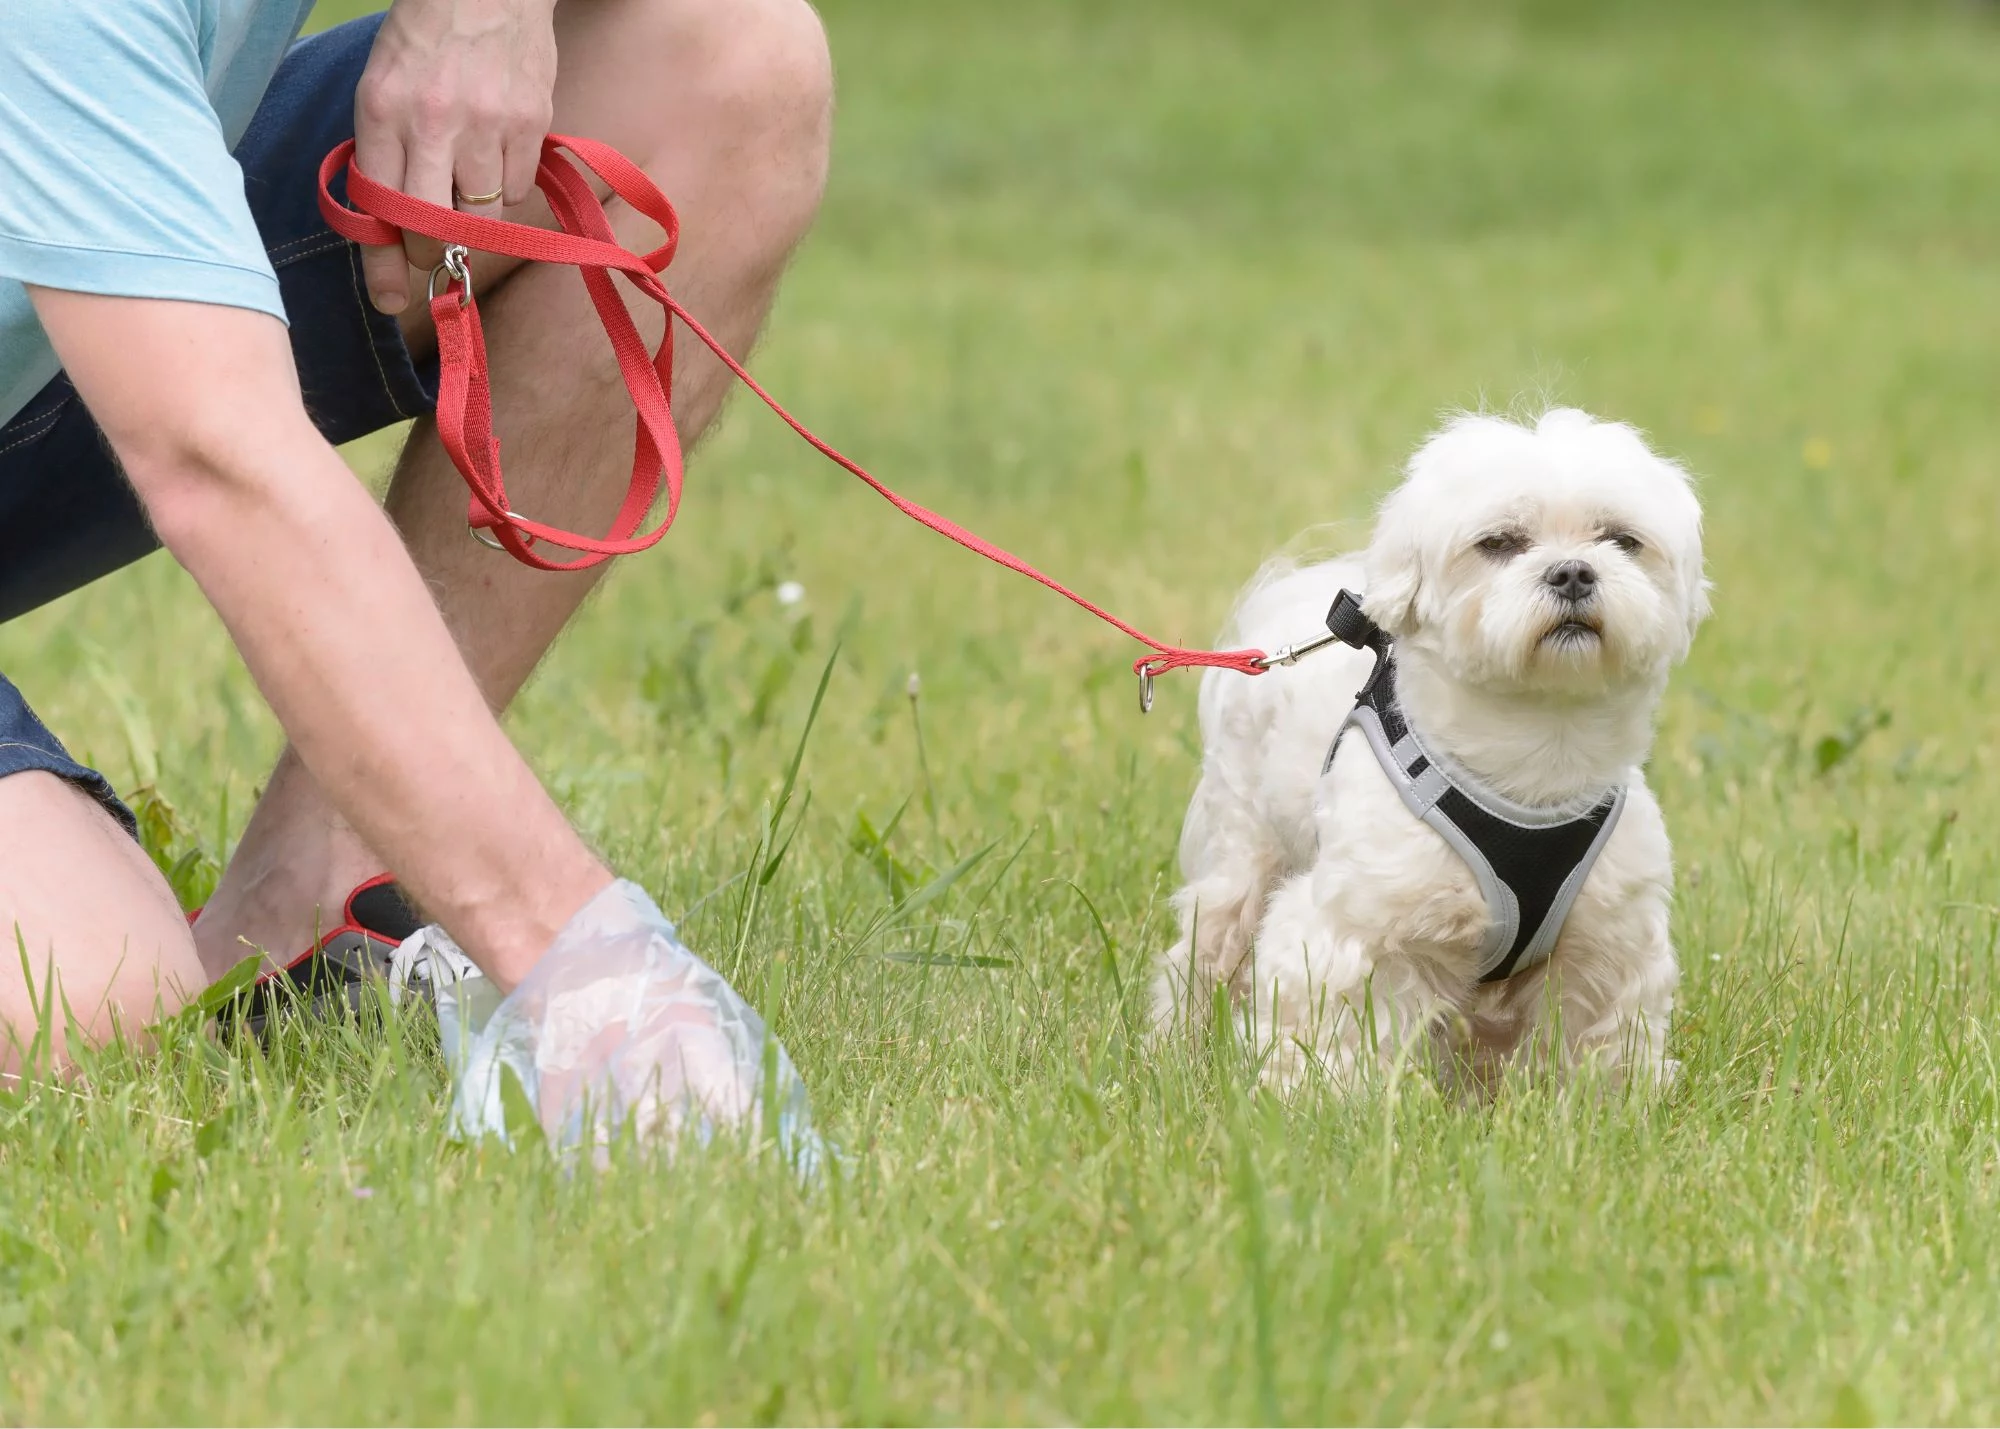 One Pile of Dog Poop Can Cost Davenport Pet Owners A Lot of Money